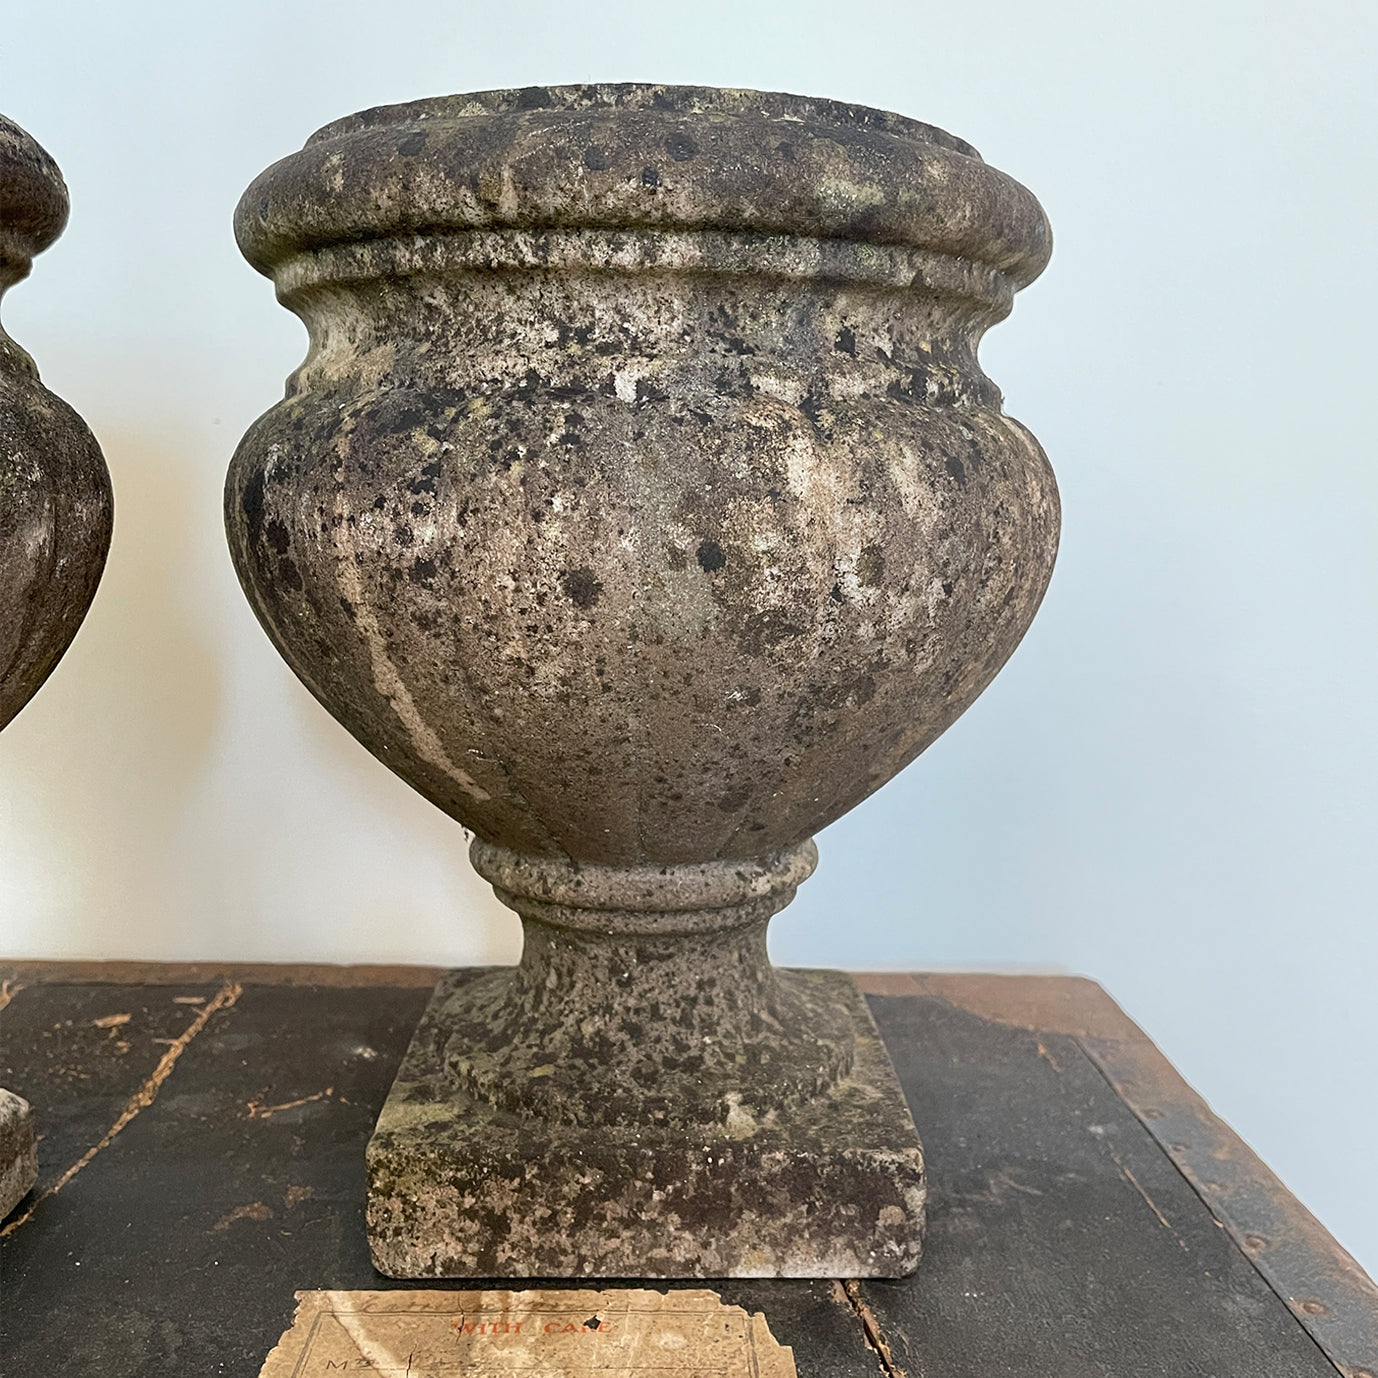 A pair of 19th century marble garden urns of classical form with a good covering of lichen. Crafted with classic proportions and shape. Both have& drainage holes. These can be used in the garden or as planters. Equally as decorative in an interior setting. Dating to c.1880 - SHOP NOW - www.intovintage.co.uk